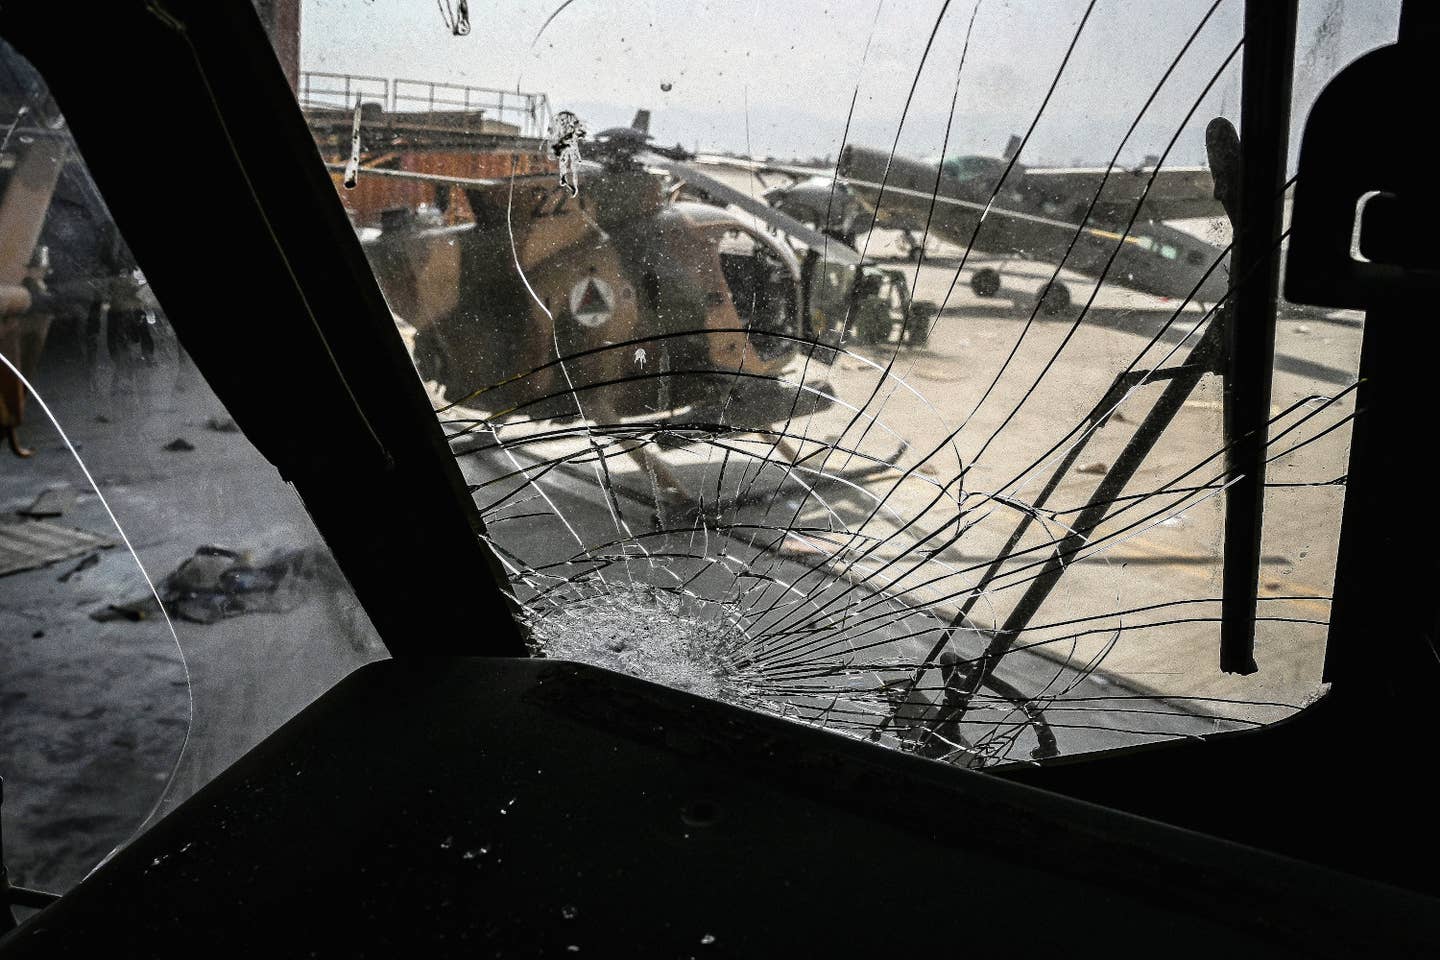 message-editor%2F1630425976075-smashed-helicopter-window.jpg